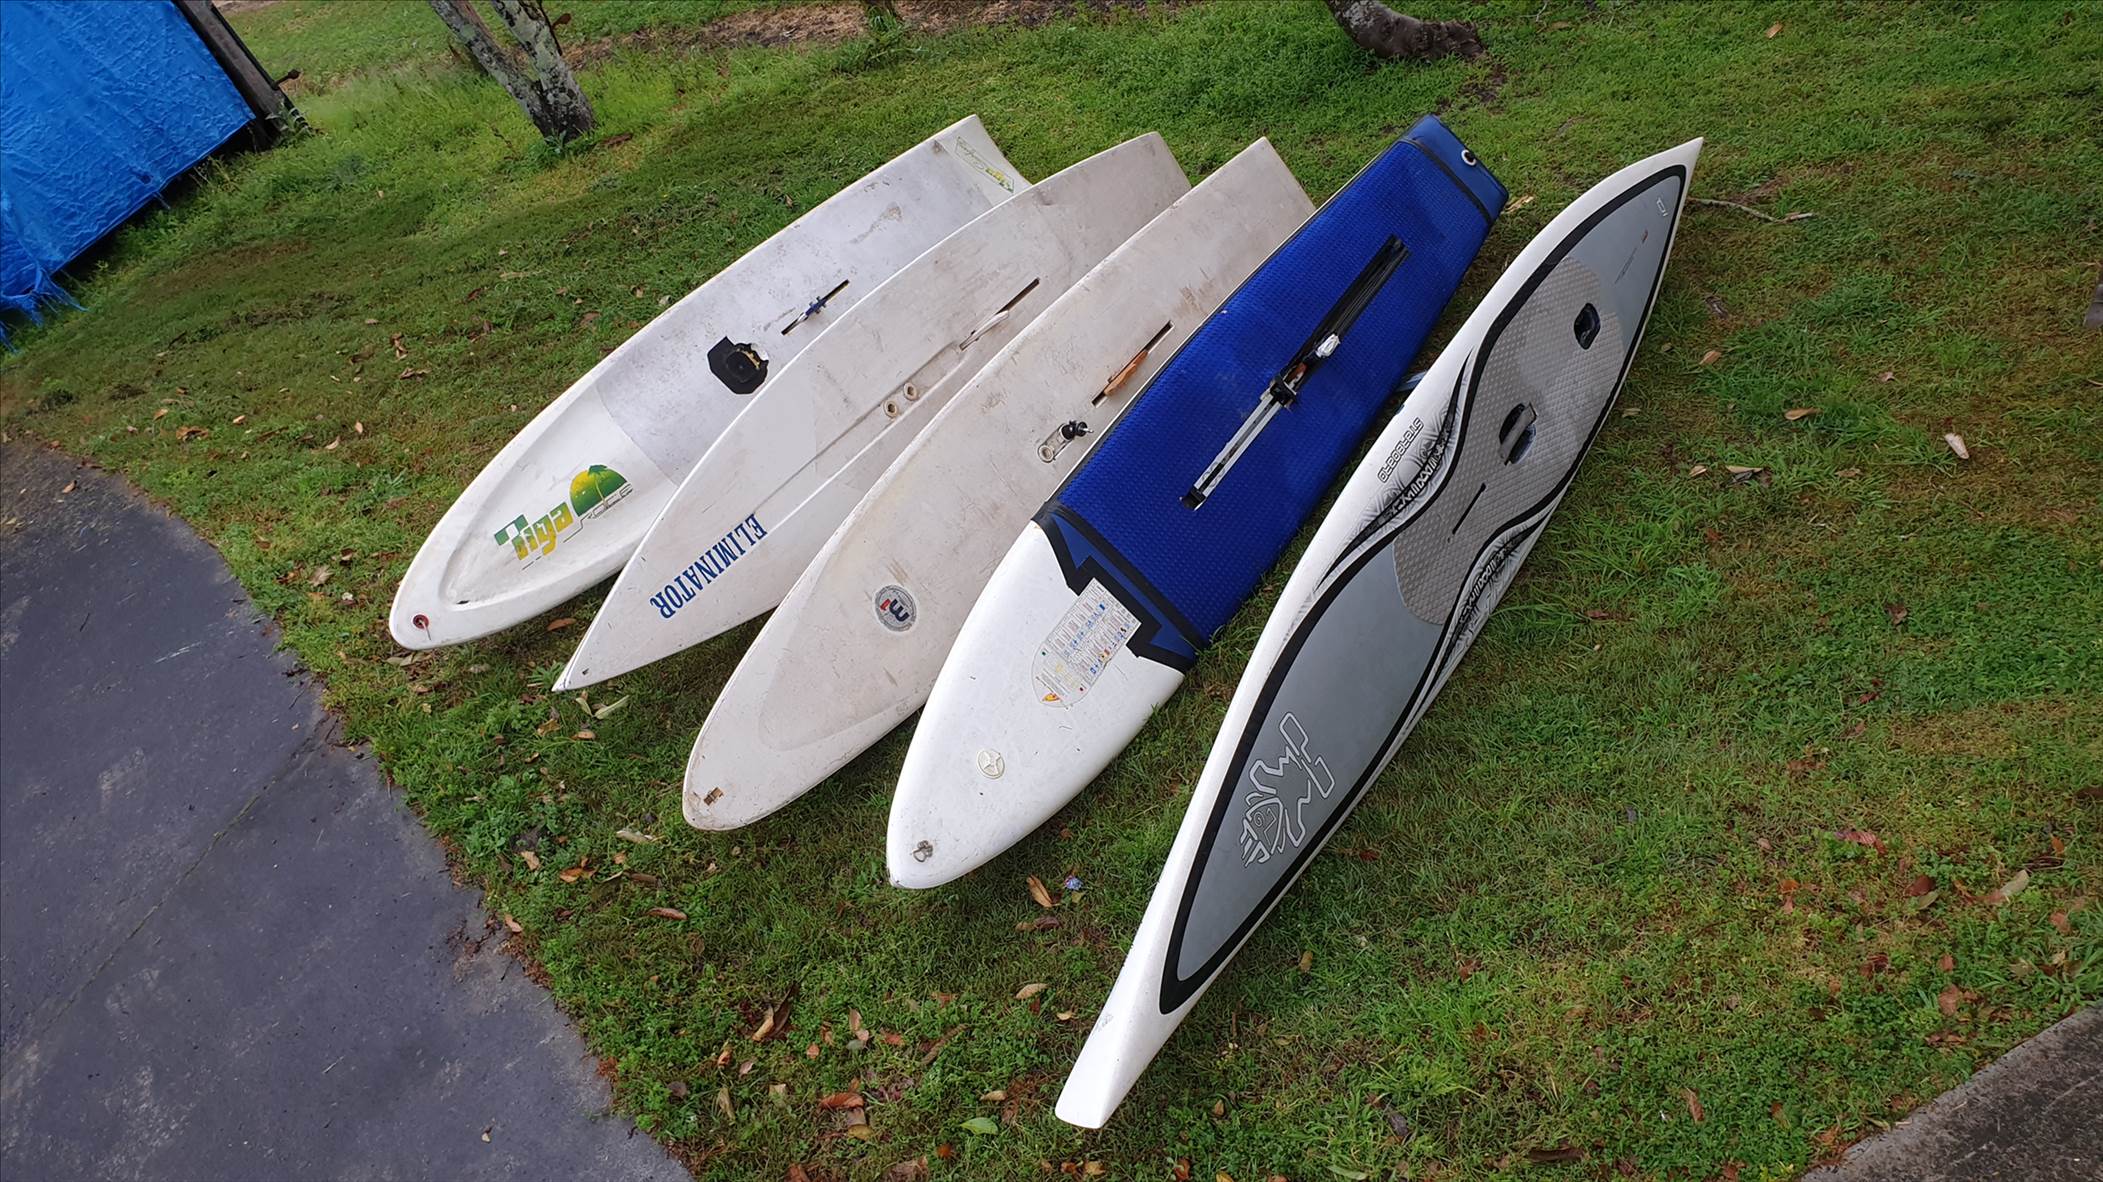 Windsurfing collections. What have you collected? | Windsurfing Forums ...